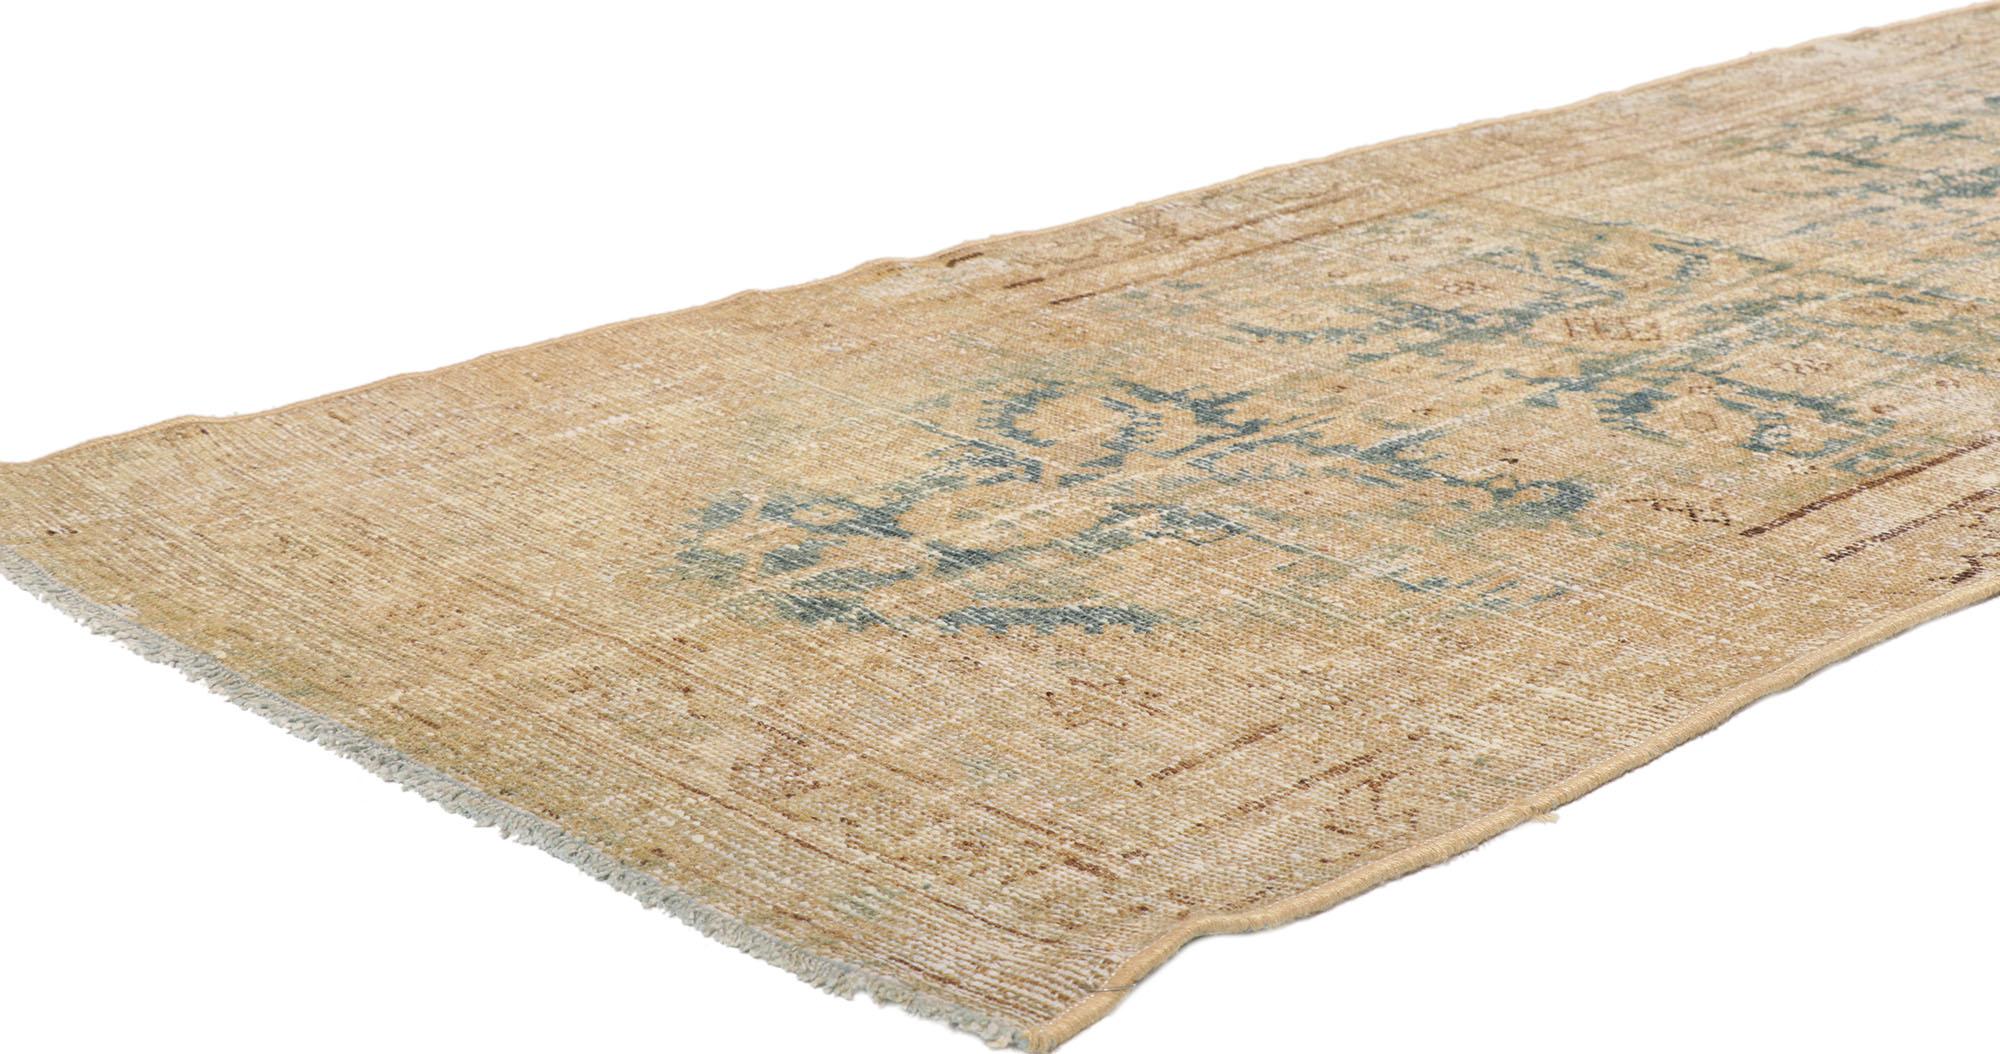 53756 Distressed Antique Persian Malayer runner 02'11 x 11'09. Emanating sophistication with rustic sensibility, this hand knotted wool distressed antique Persian Malayer runner will take on a curated lived-in look that feels timeless while